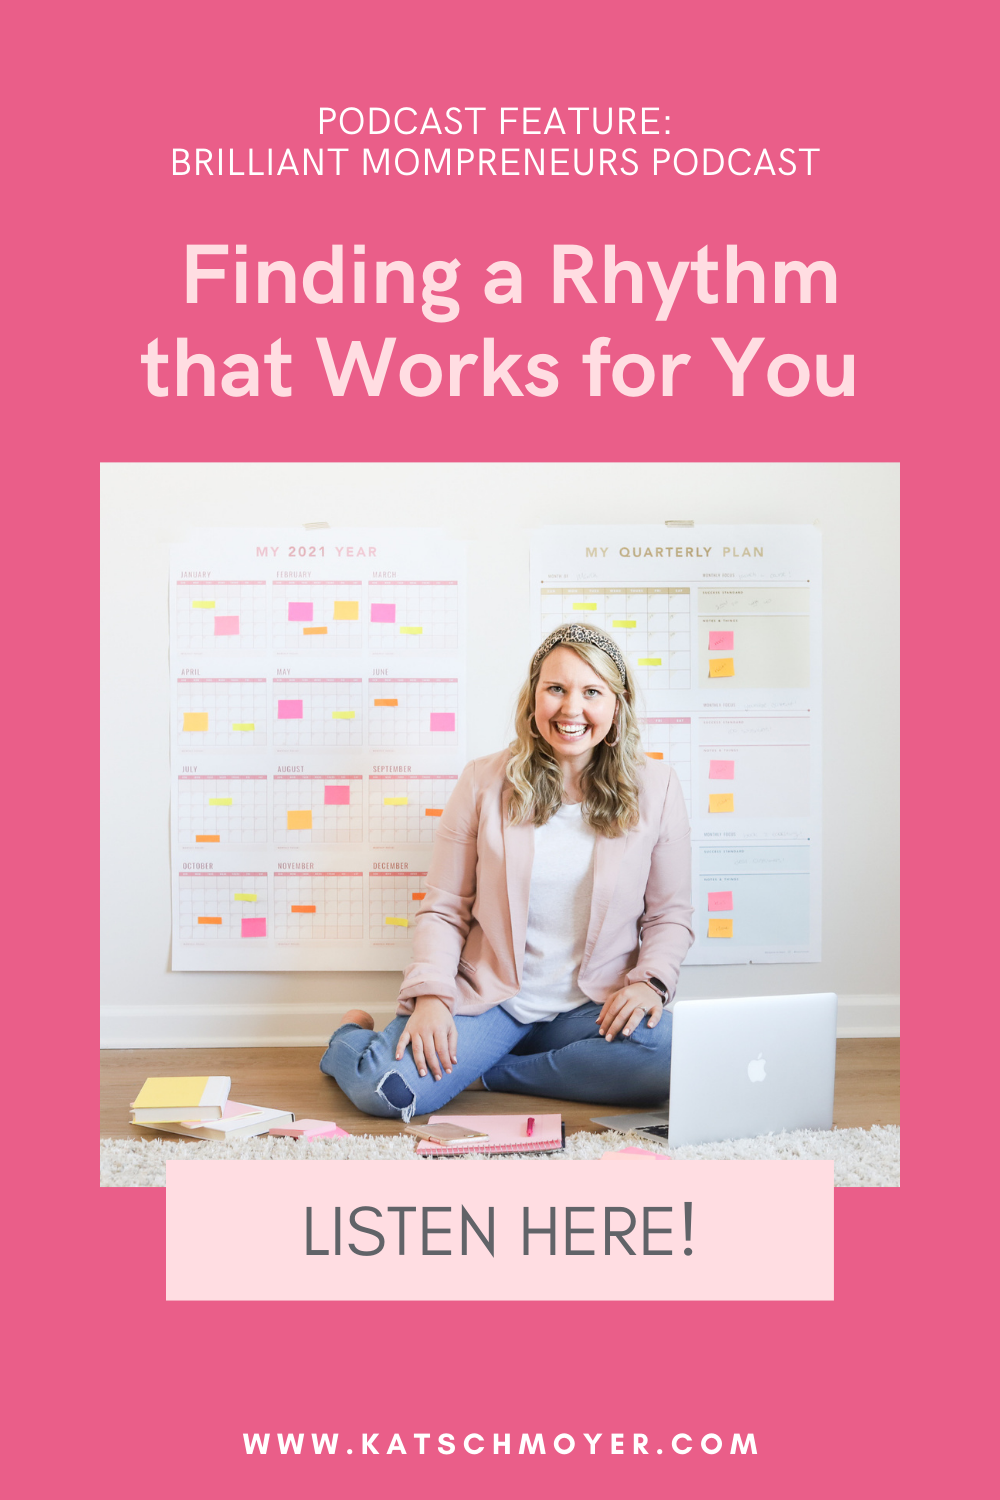 Podcast Feature: Finding a Rhythm that Works for You